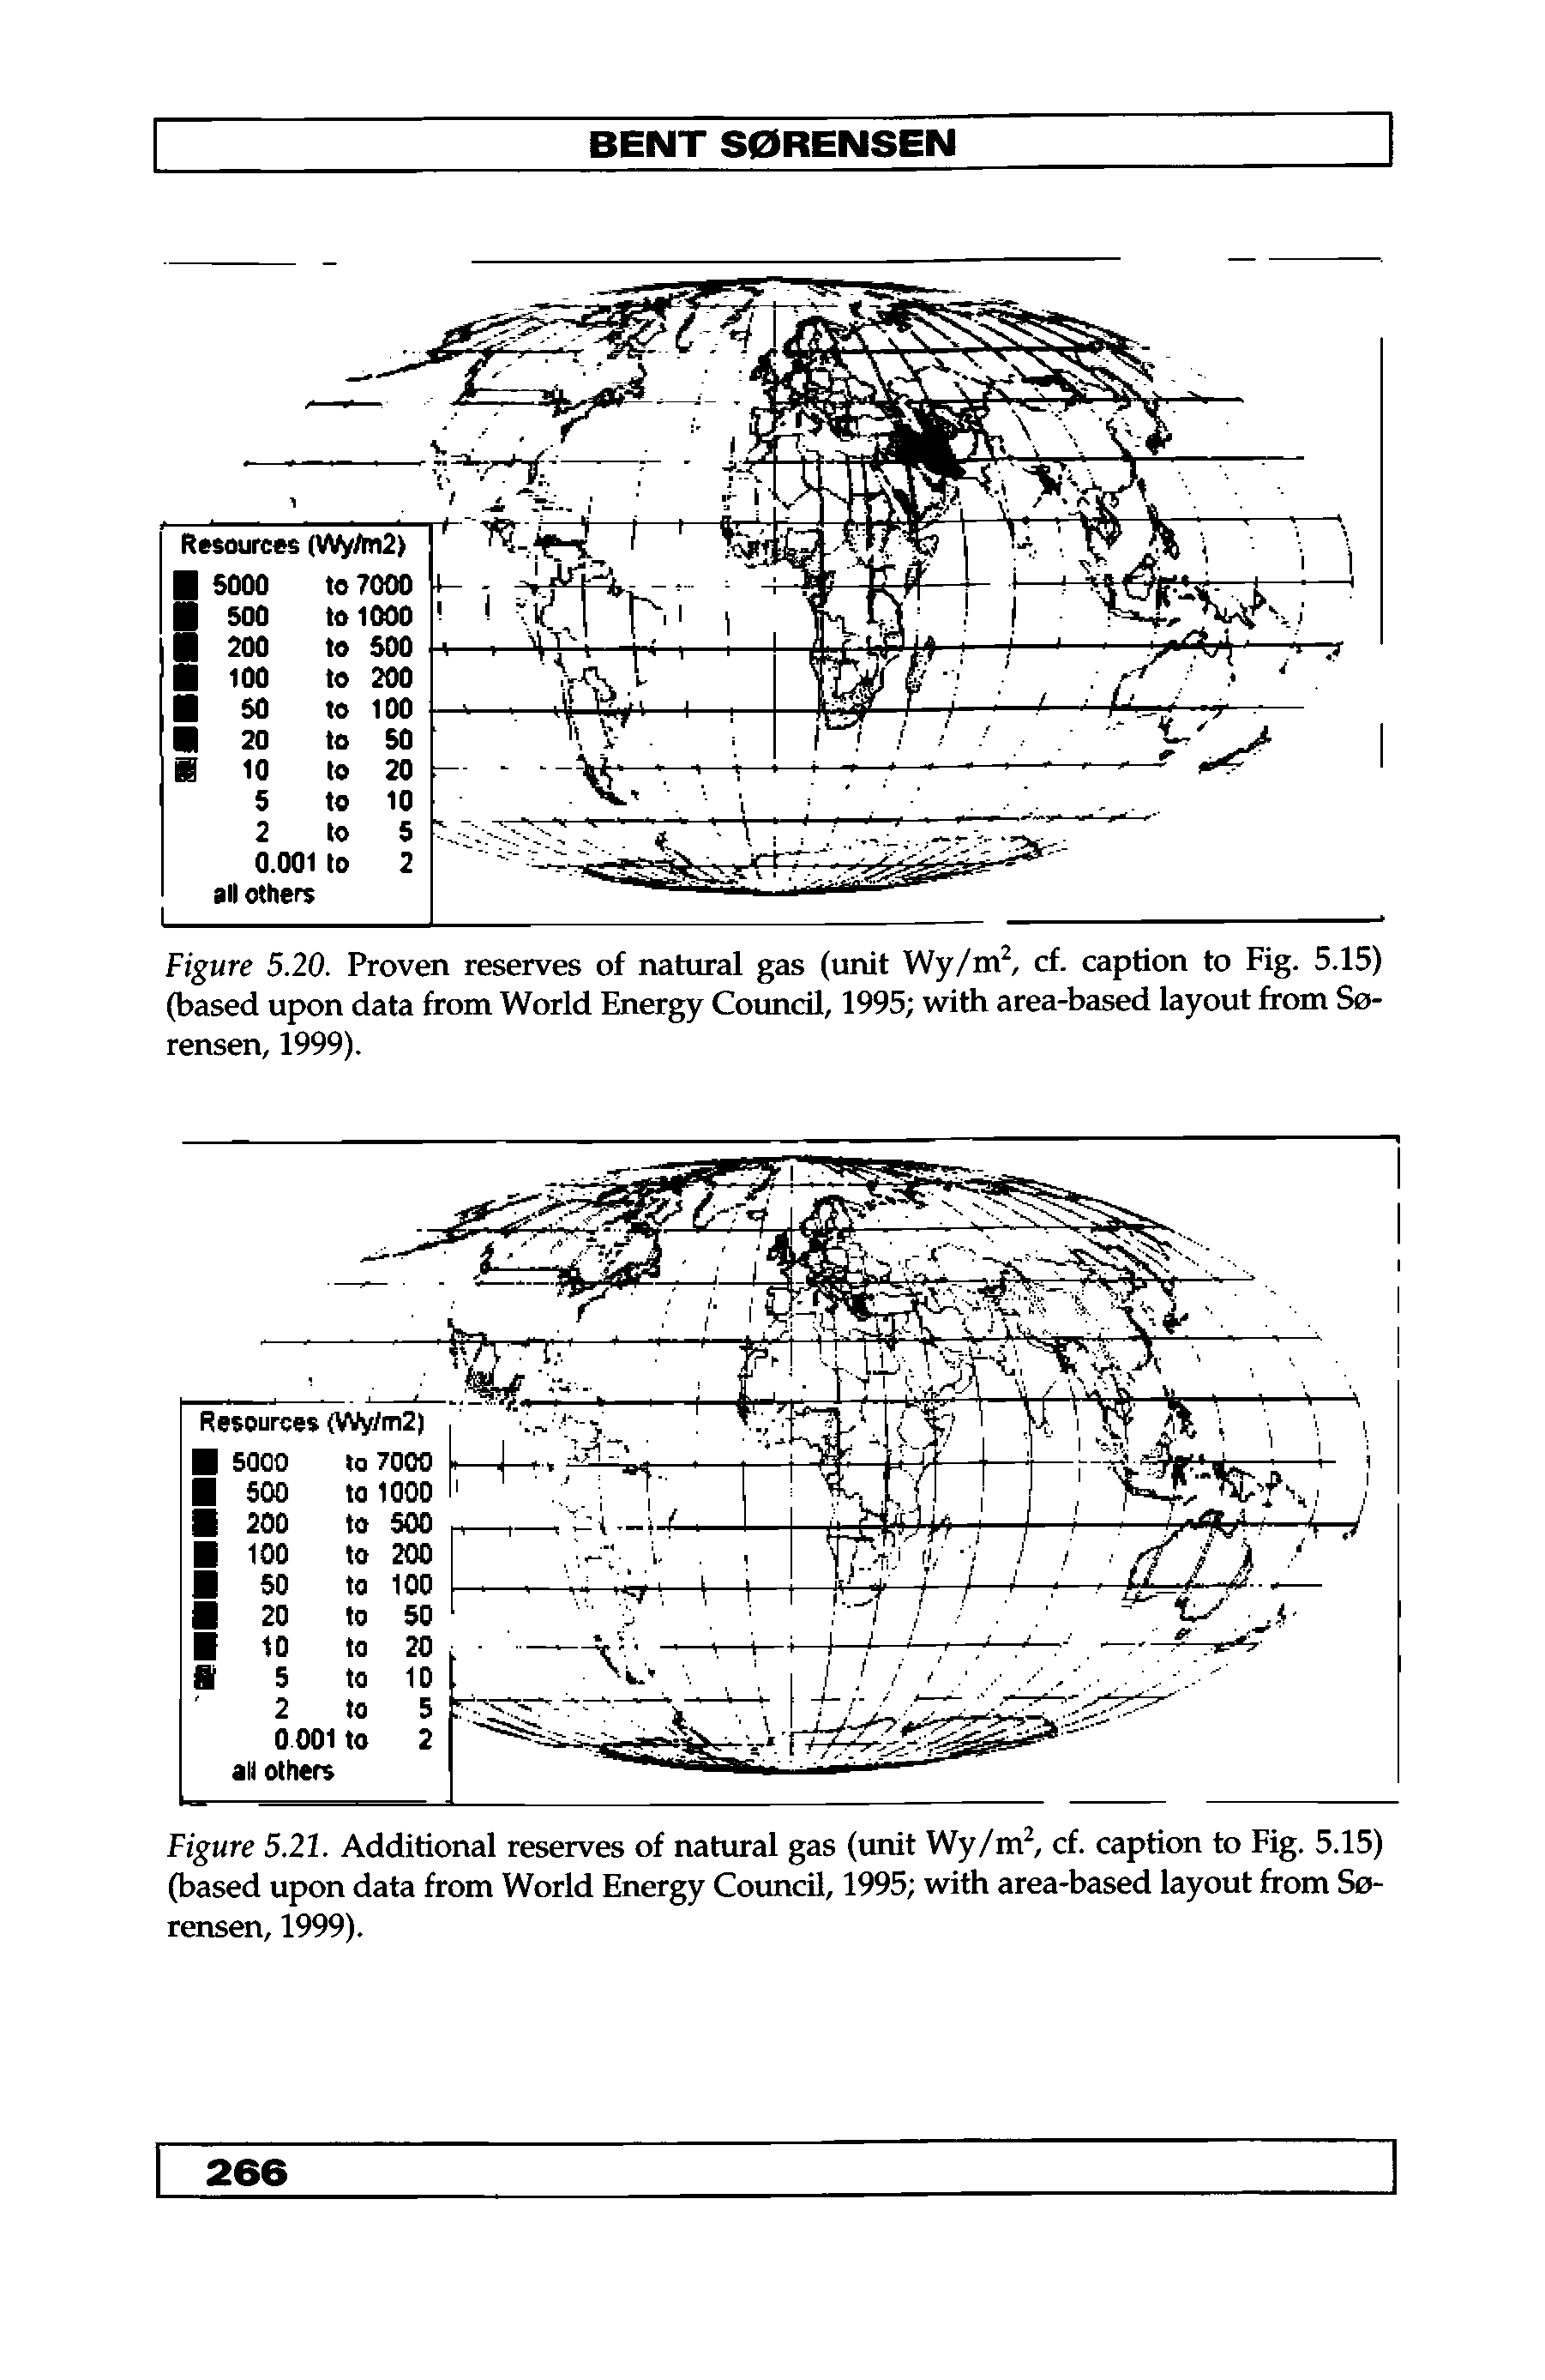 Figure 5.20. Proven reserves of natural gas (unit Wy/m cf. caption to Fig. 5.15) (based upon data from World Energy Coimdl, 1995 with area-based layout from Sorensen, 1999).